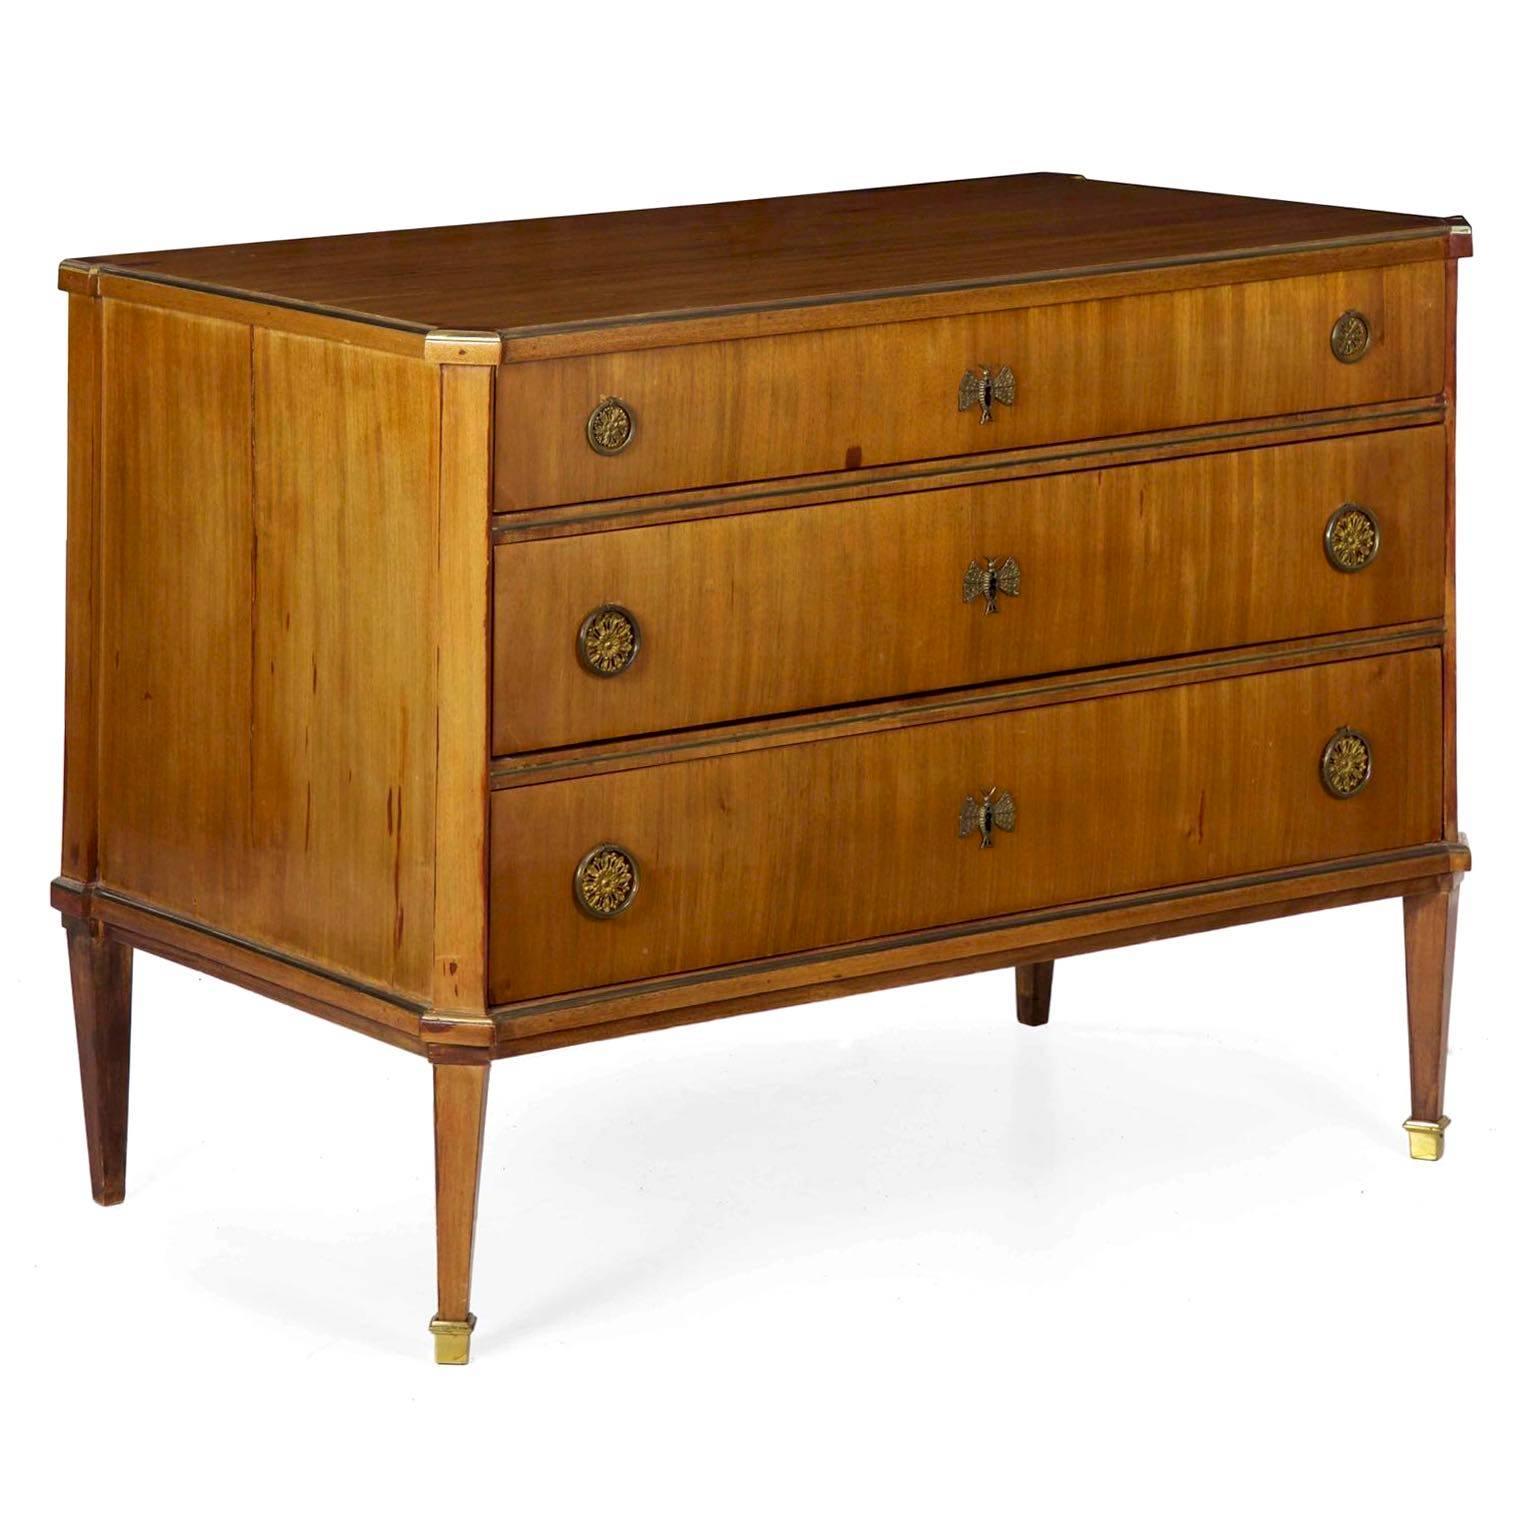 An elegant chest of drawers both tidy and pleasing form, it adheres closely to the Empire aesthetic with an angularity and faceted squareness throughout. Restraint is shown in every aspect of the design, the craftsman choosing mahogany veneers that